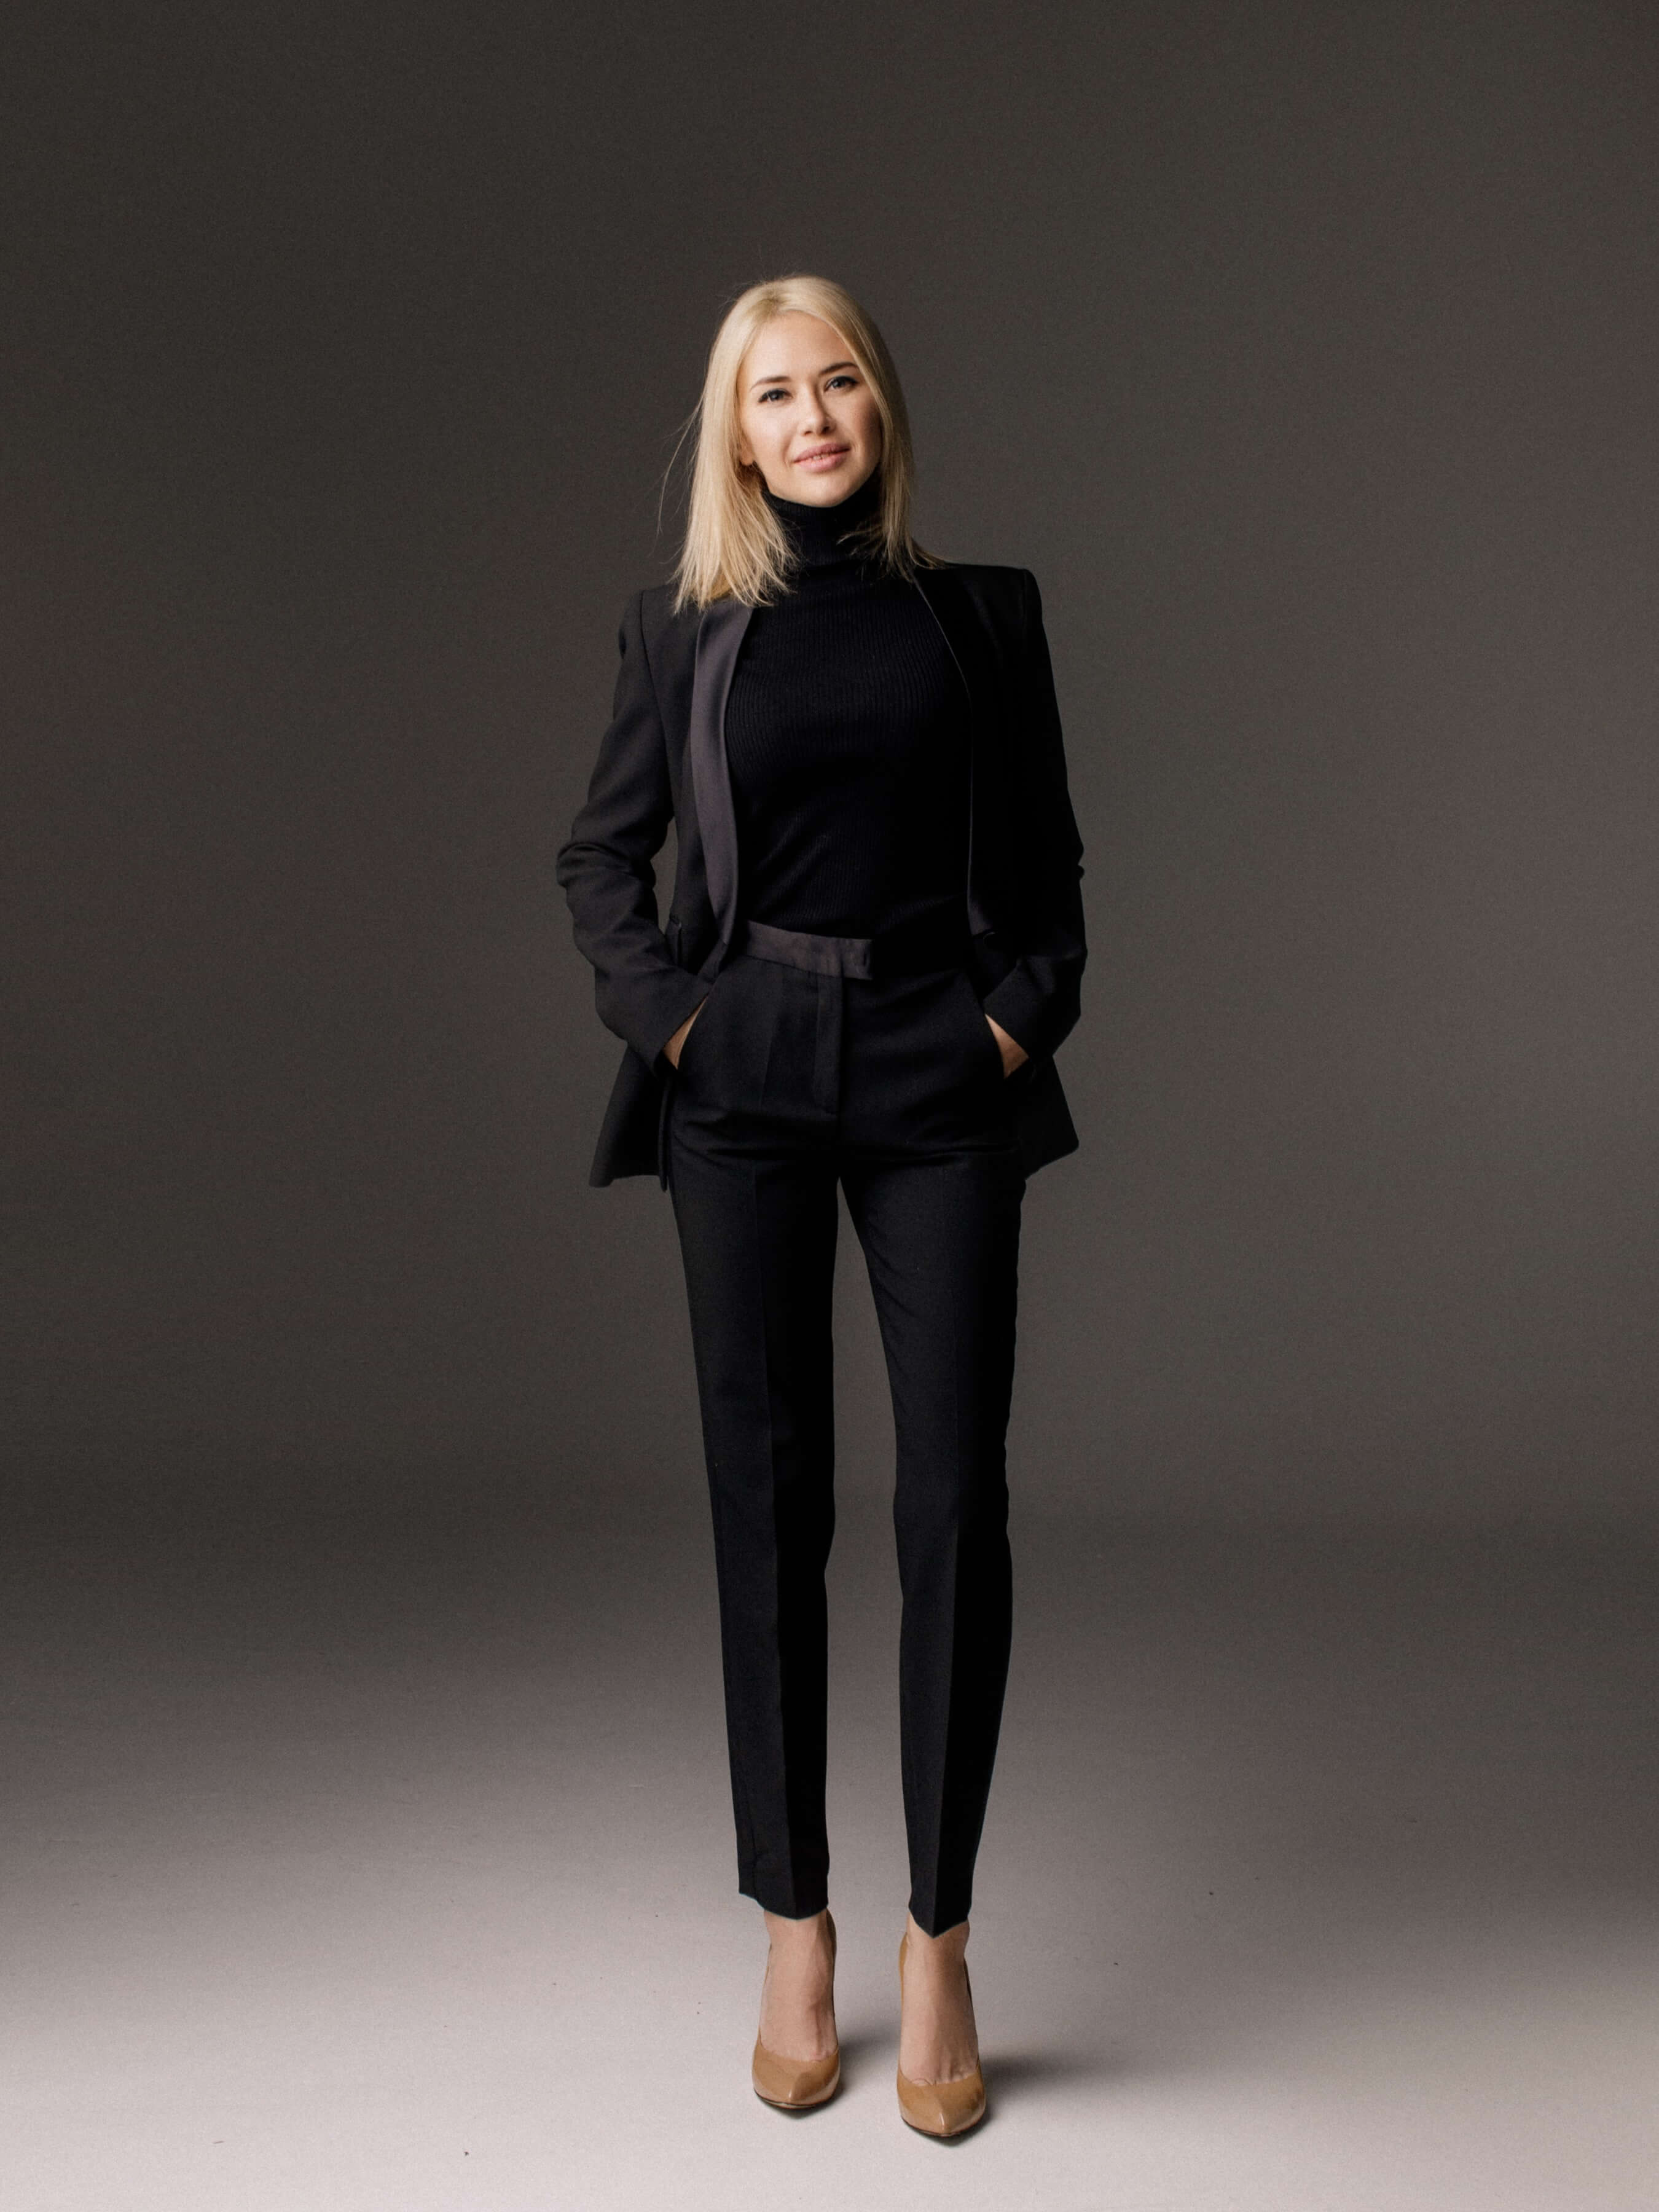 a woman with professional suit